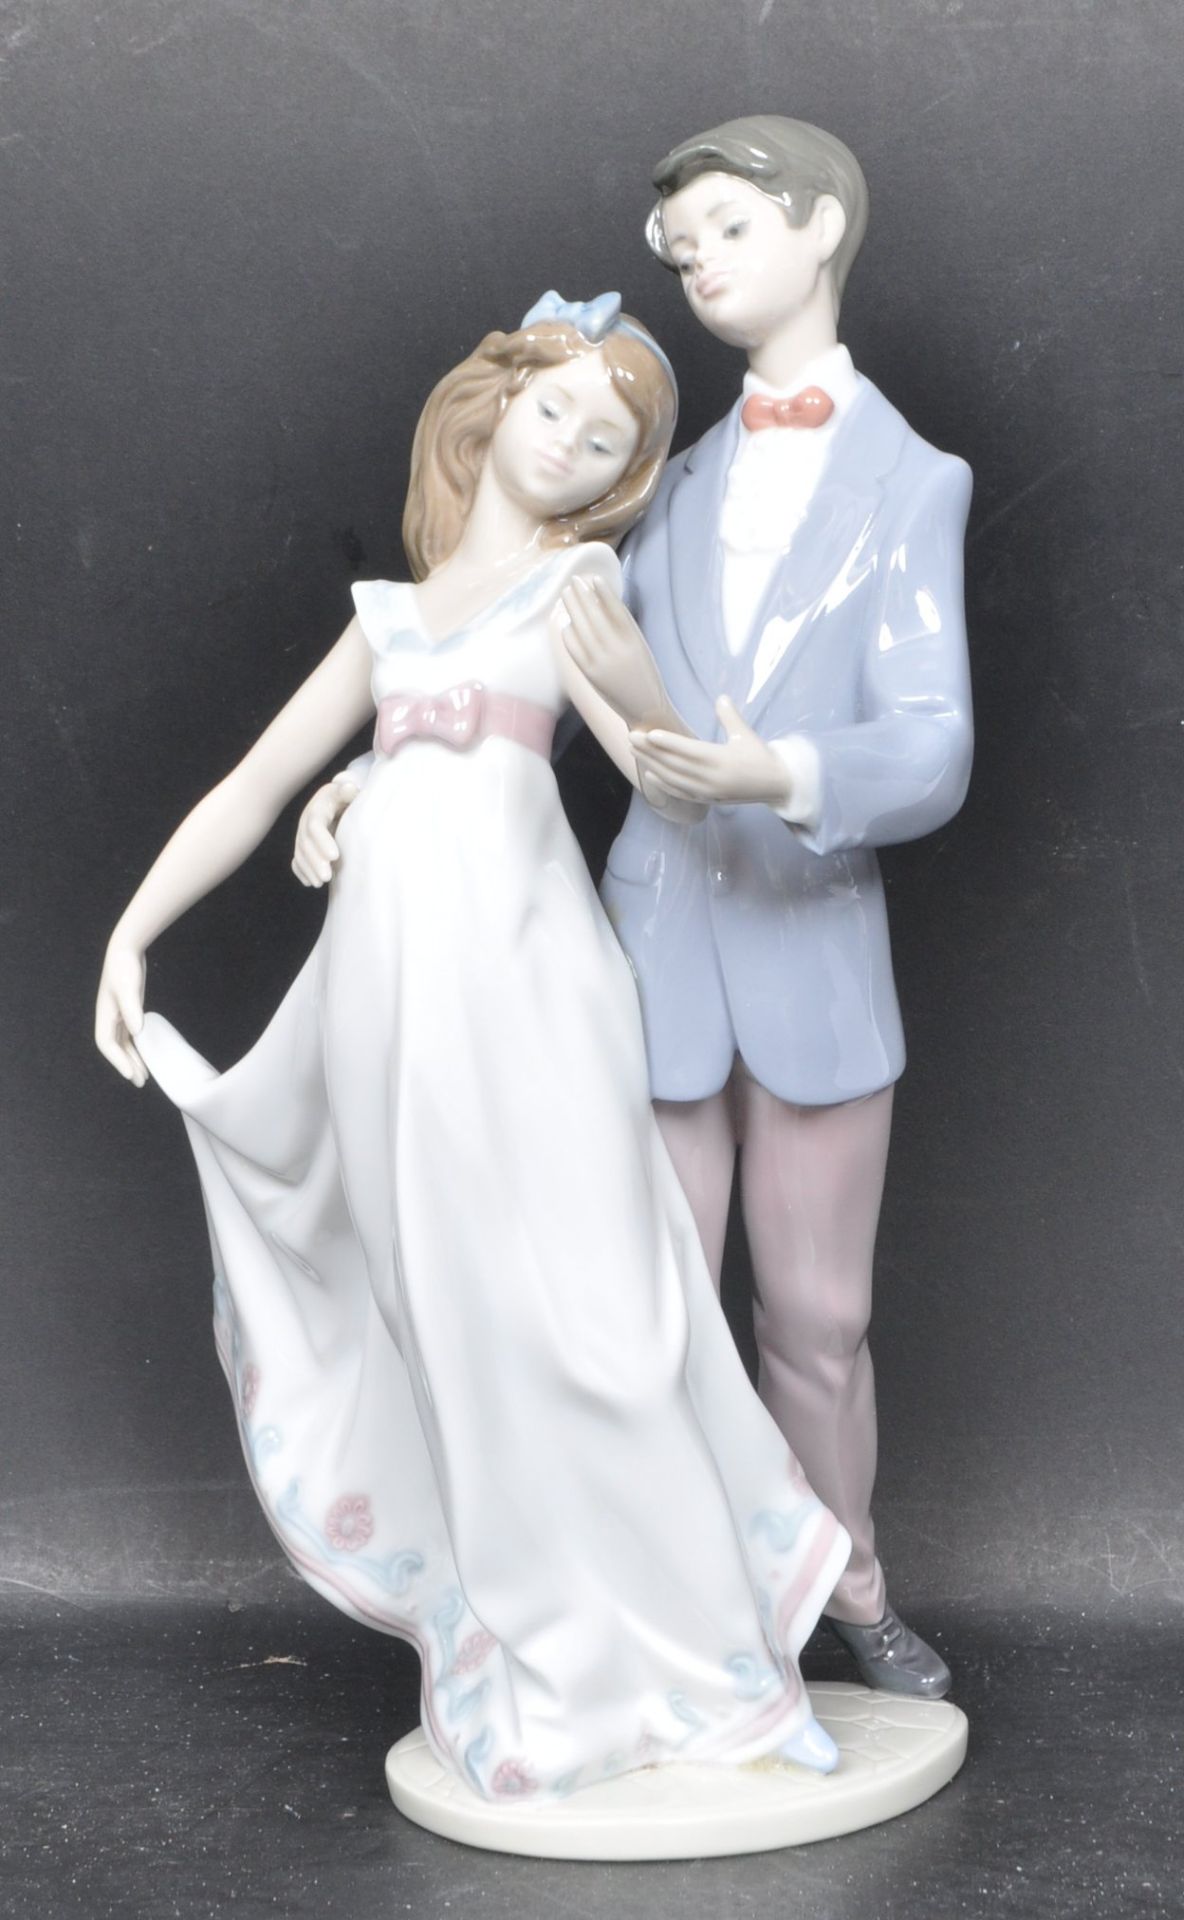 LLADRO 7642 - NOW AND FOREVER CERAMIC PORCELAIN FIGURINE